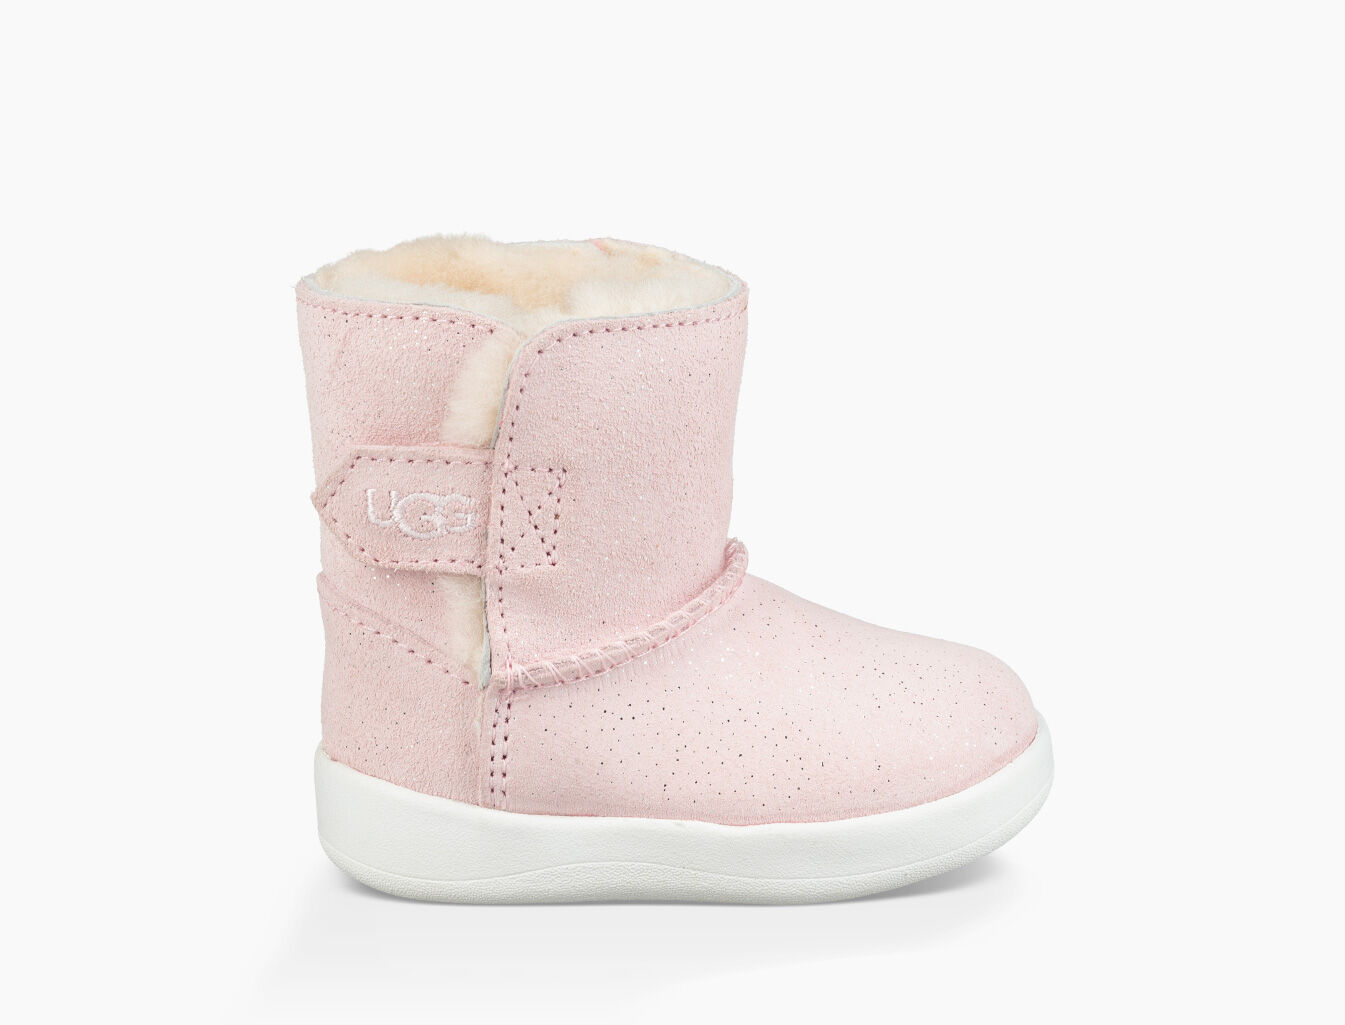 pink uggs baby